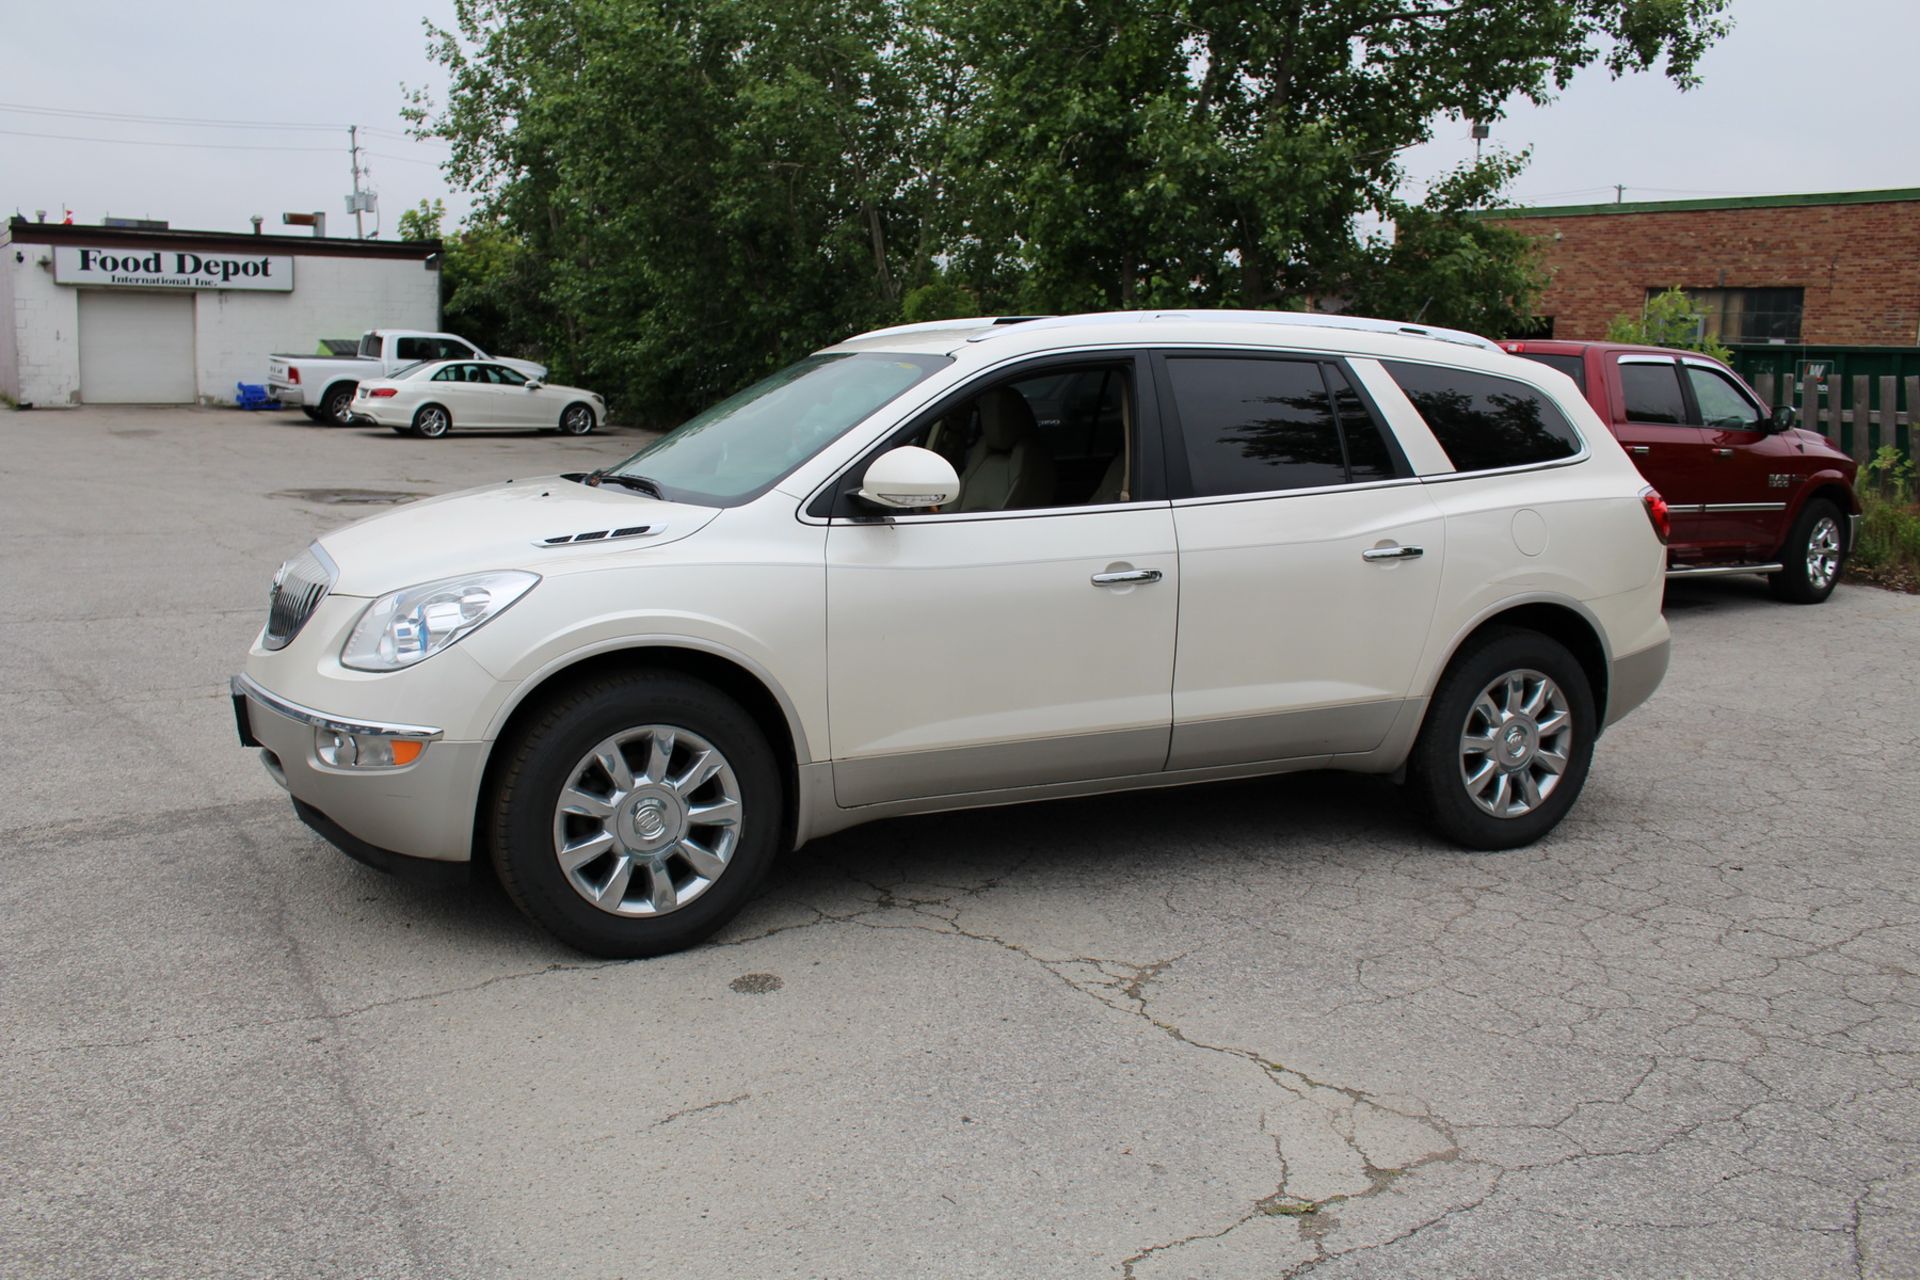 2011 BUICK MODEL ENCLAVE SUV W/ 3.6L V6 GAS ENGINE (APPROX. 218,000 KM), VIN 5GAKRCED2BJ397396 ( - Image 3 of 4